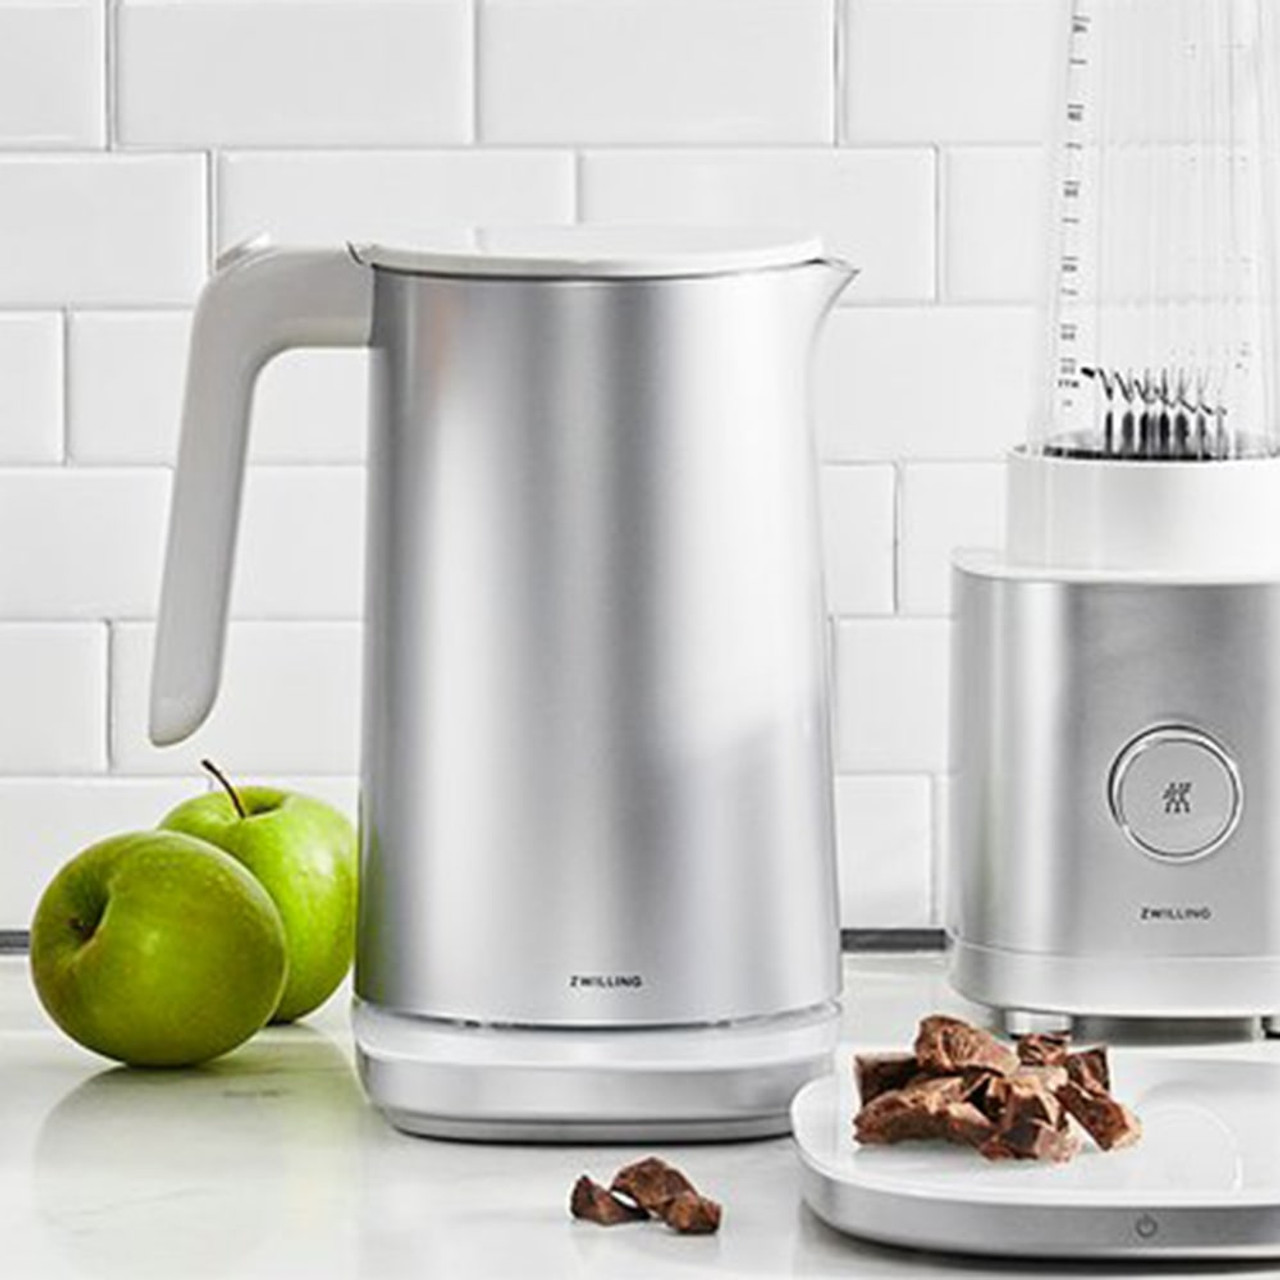 https://cdn11.bigcommerce.com/s-hccytny0od/images/stencil/1280x1280/products/3656/13043/zwilling-enfinigy-electric-kettle-pro-1__43447.1634317275.jpg?c=2?imbypass=on